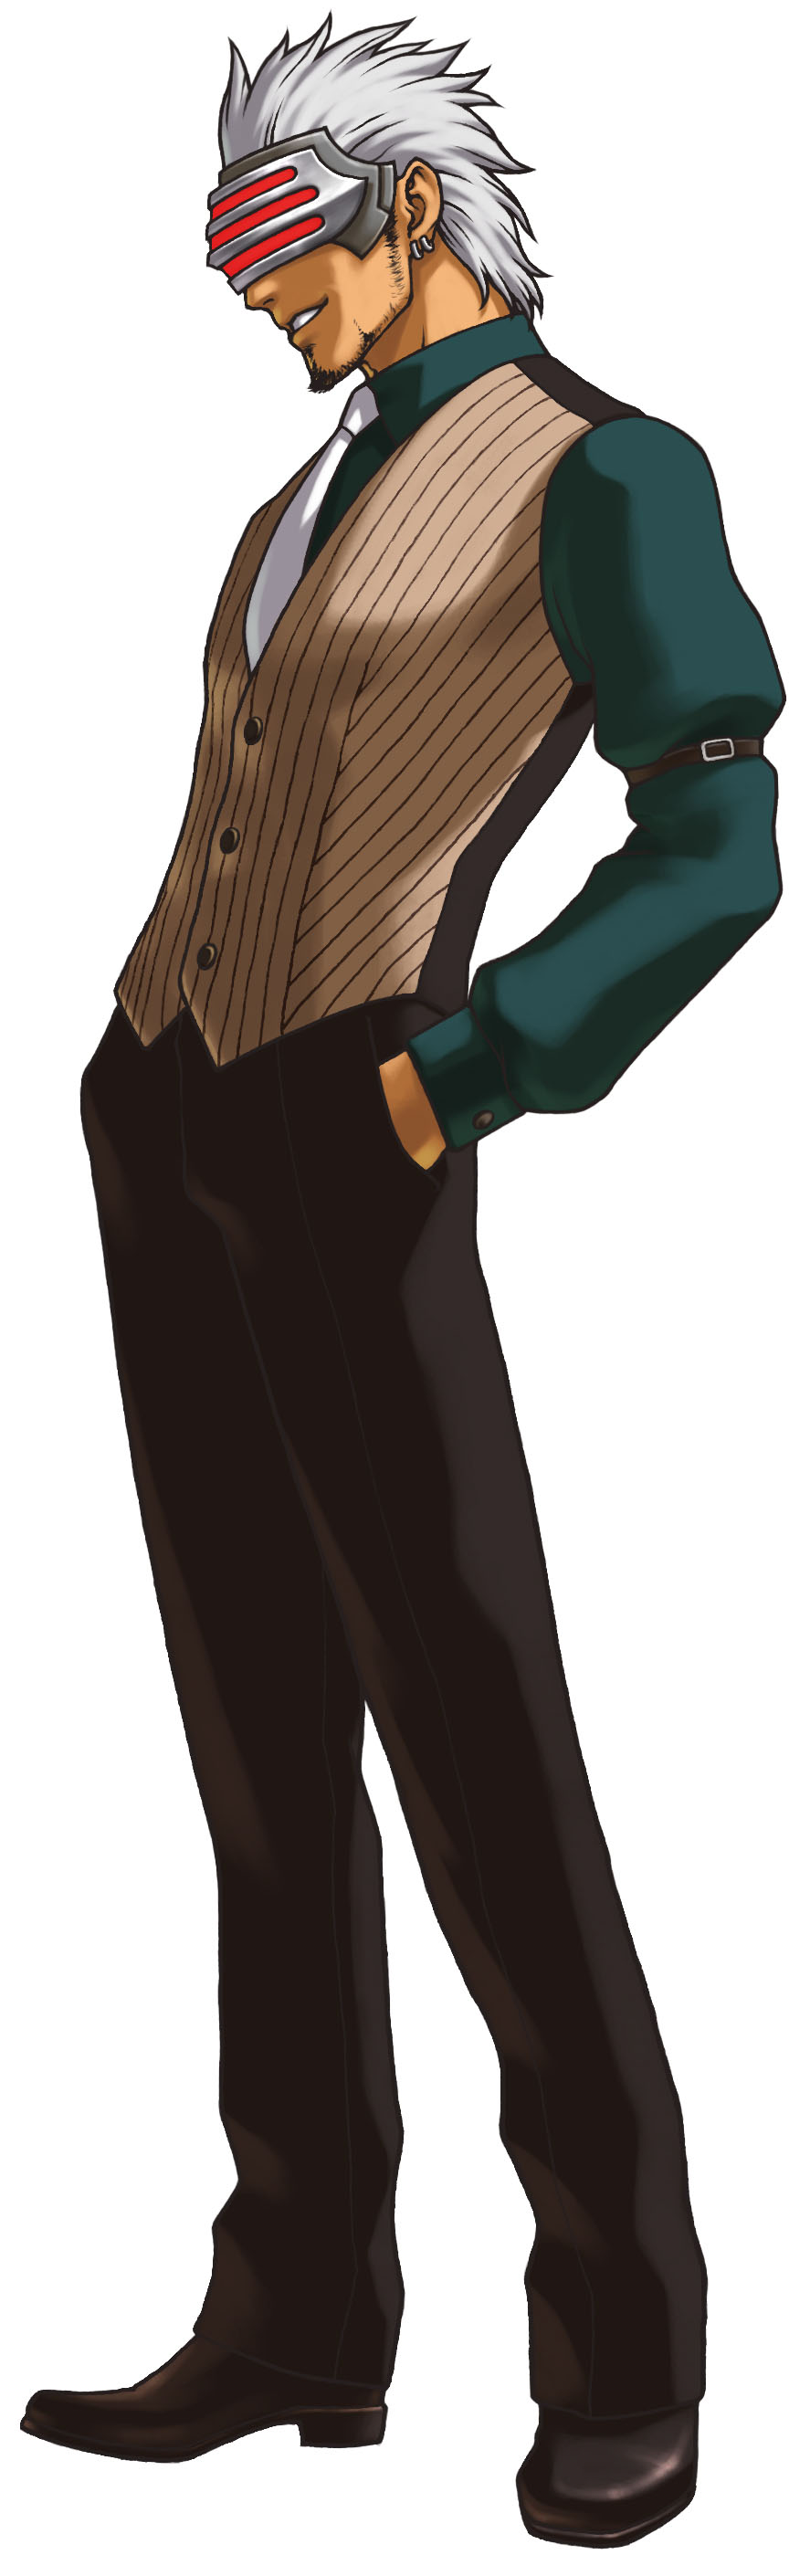 Godot Ace Attorney 3 Official Artwork